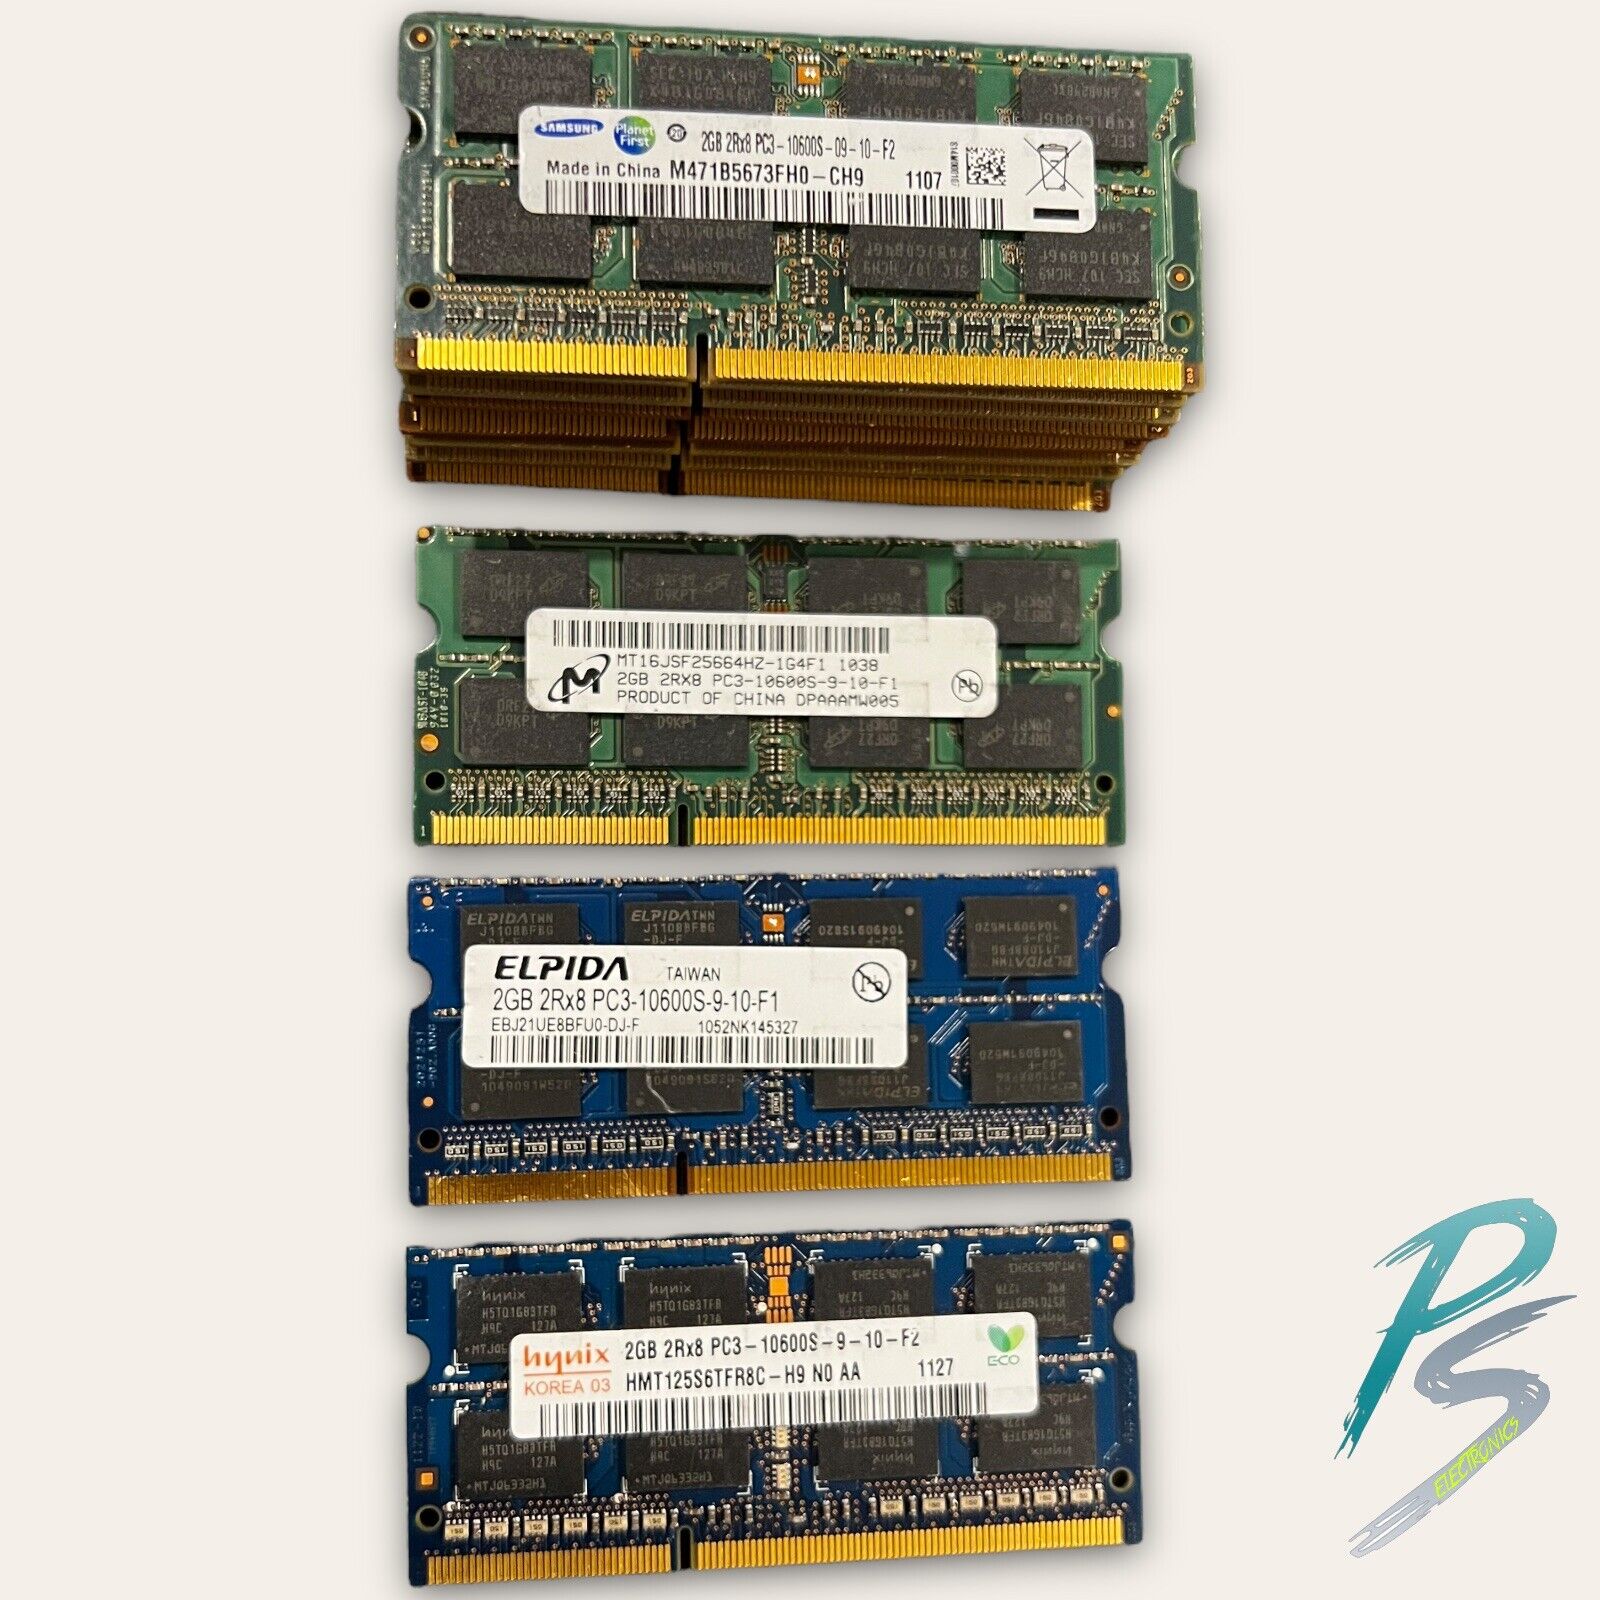 LOT OF 11 - 2GB 2RX8 PC3-10600S DDR3-1333 SODIMM Memory RAM - Mixed Manufacturer